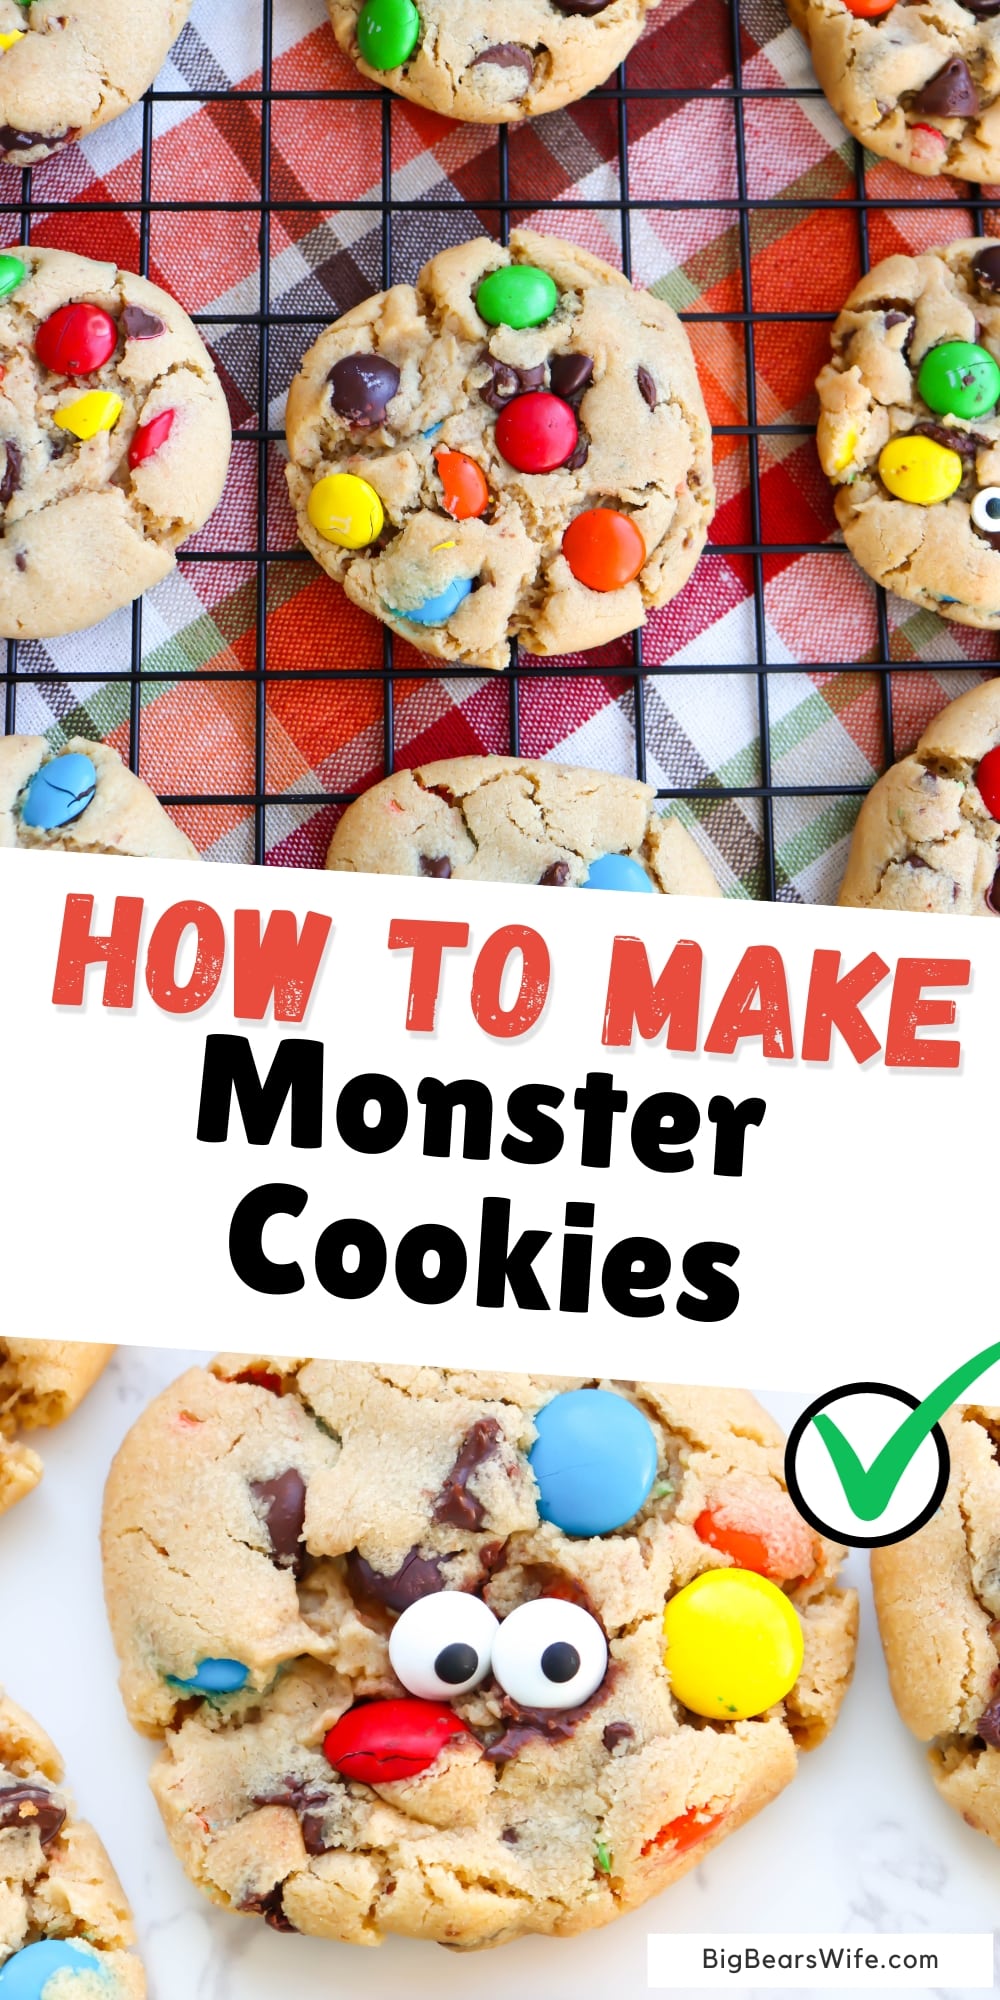 These Monster Cookies are peanut butter cookies, stuffed with chocolate chips and M&MS candies with the occasional candy eye for decoration!  via @bigbearswife